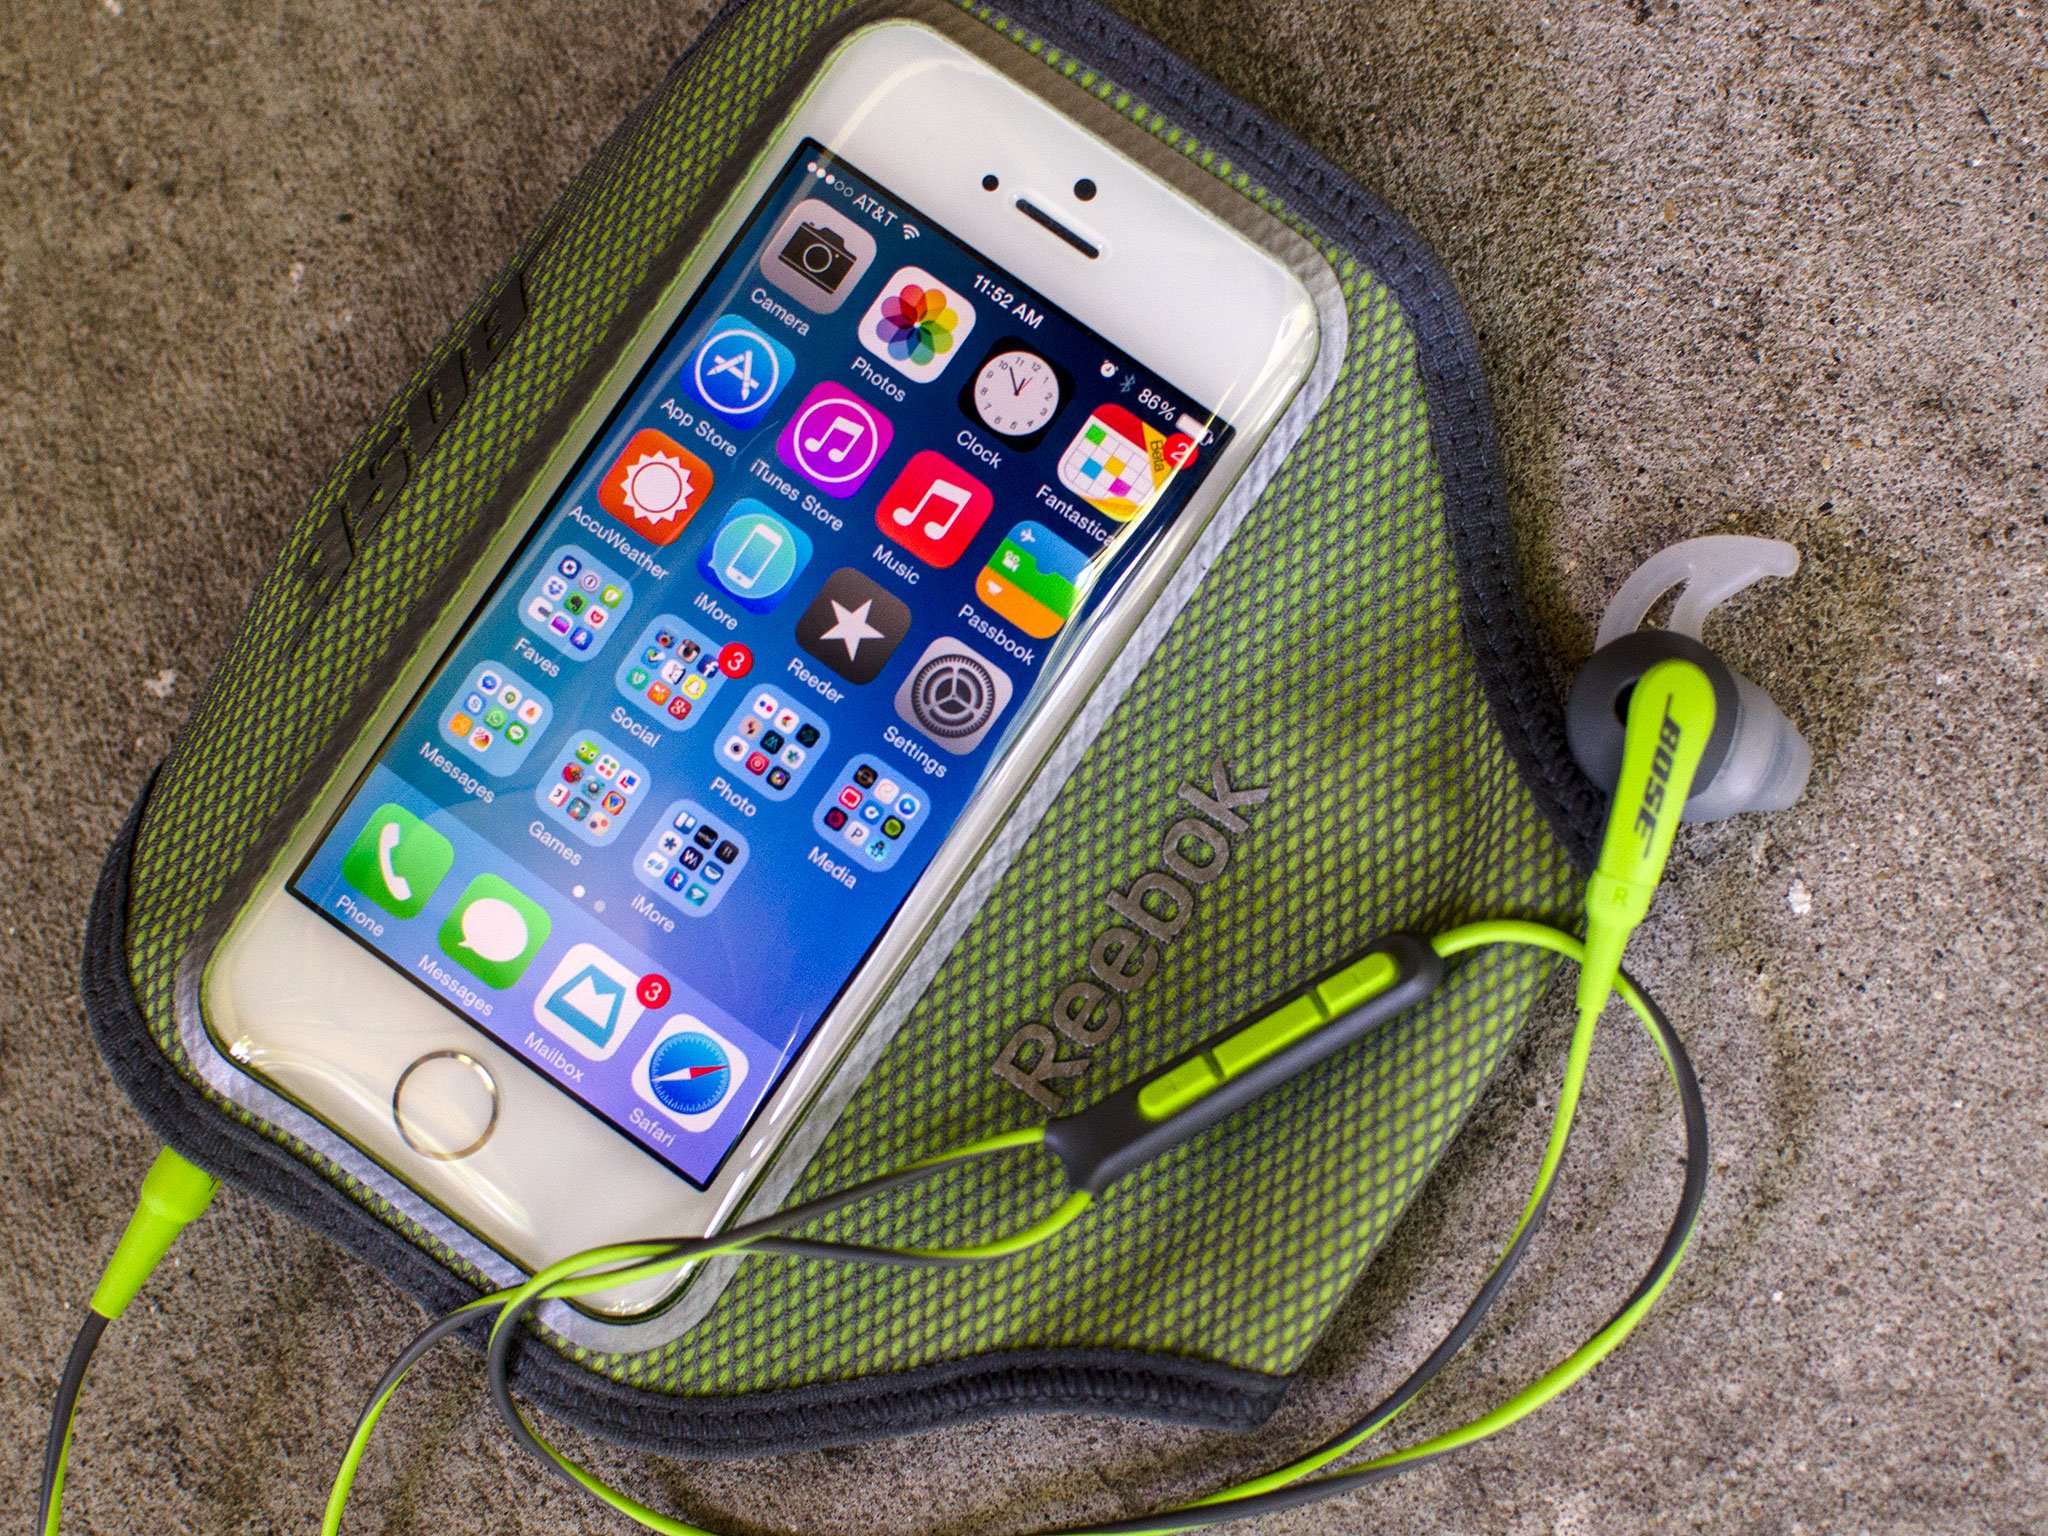 Best iPhone cases and armbands for working out: Incase, Belkin, Reebok, and more!